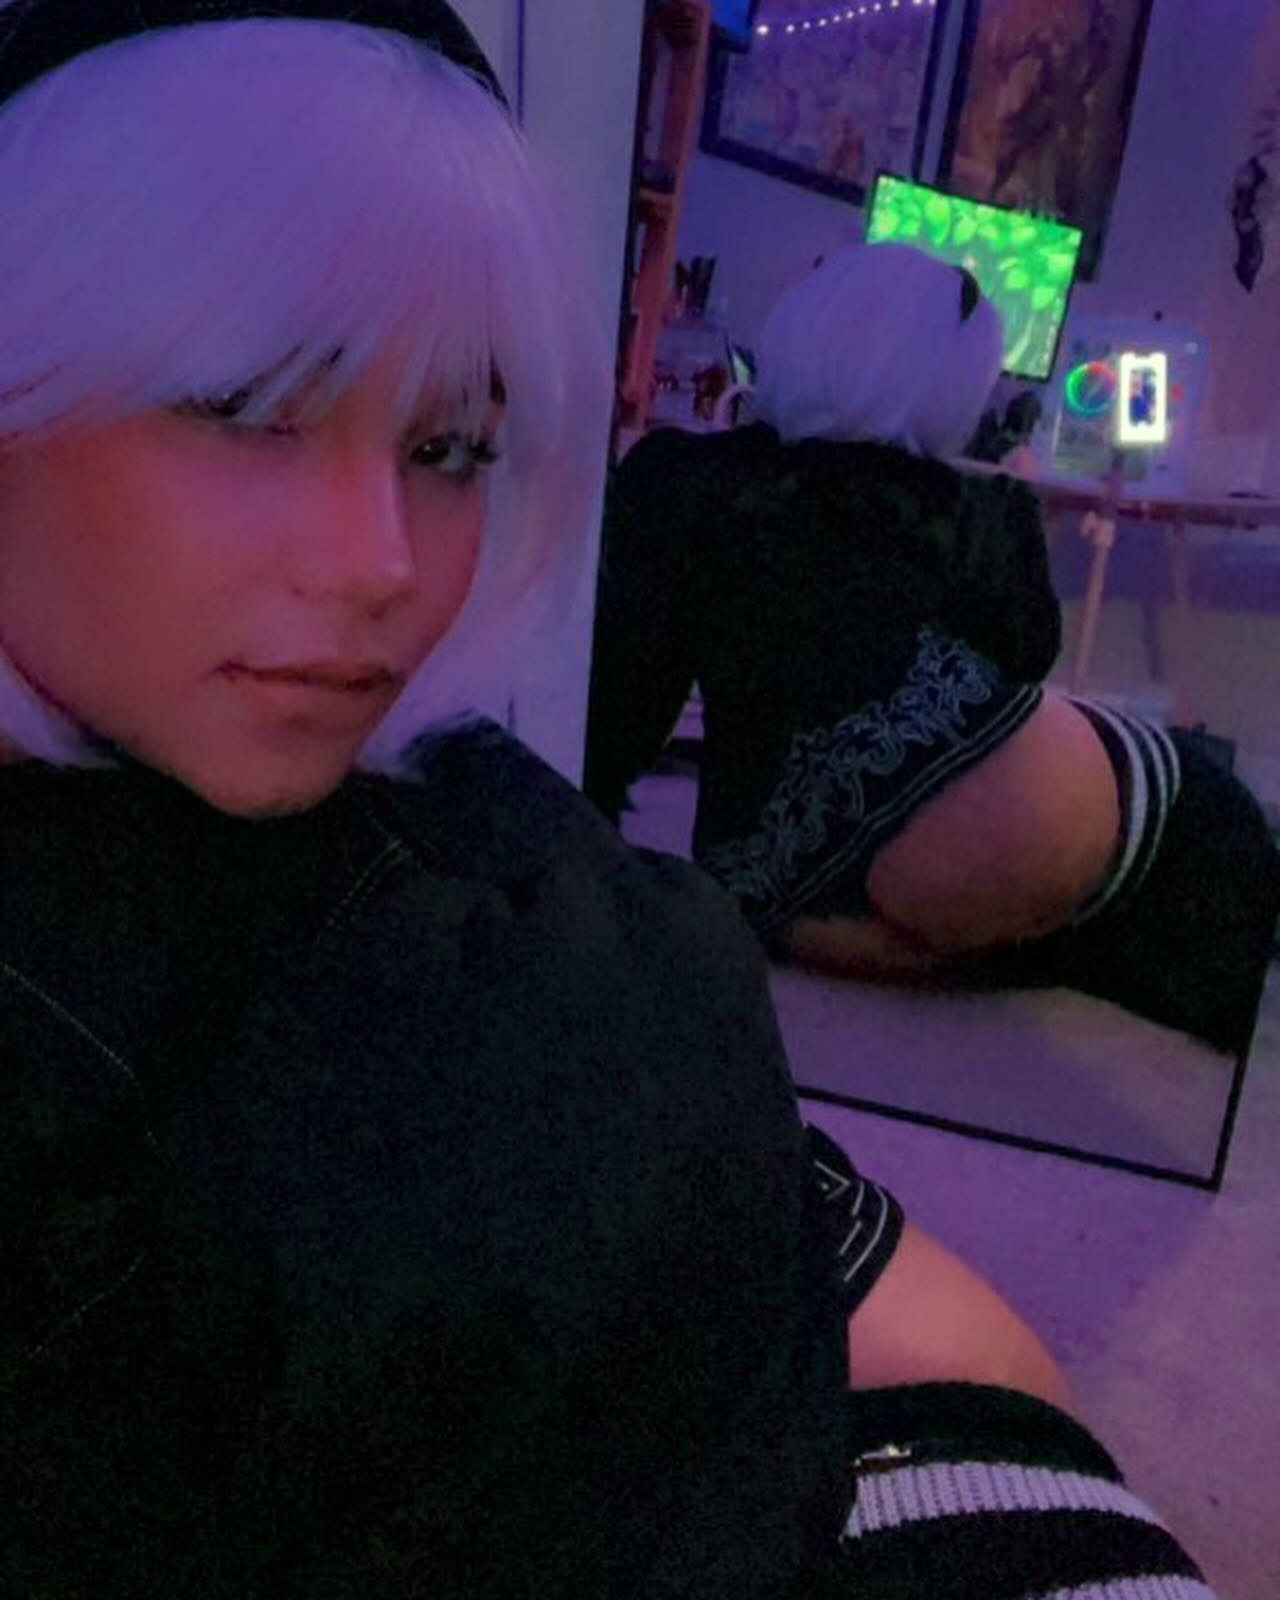 Good morning 🖤#2b #neirautomata #neirautomatacosplay #cosplay #plussize #thick #thickthighssaveslives #thickthighsmatter #gamers #gamergirl #pcgamers